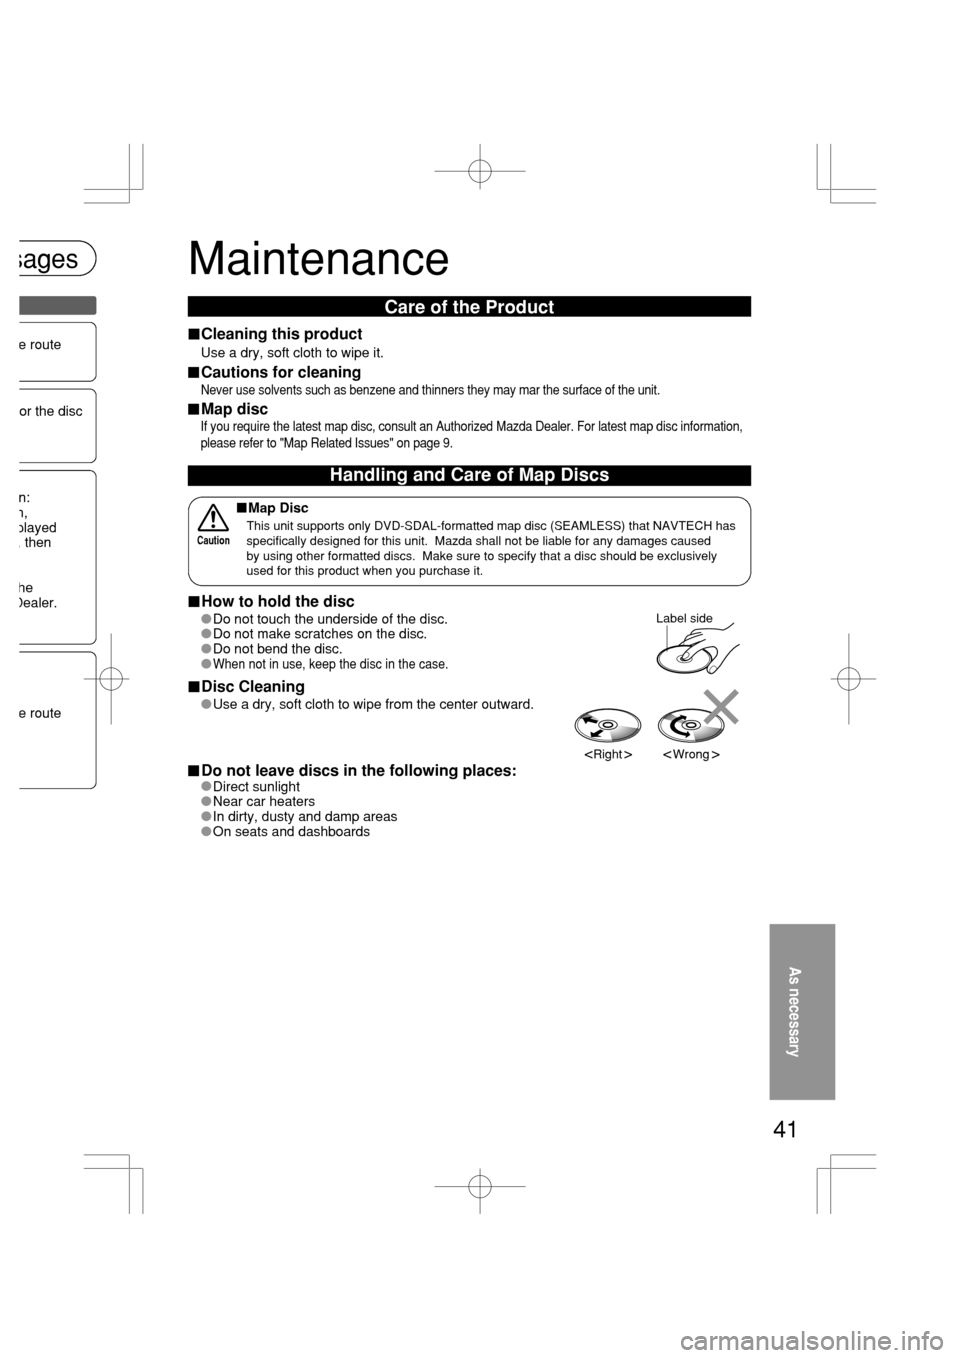 MAZDA MODEL RX 8 2005  Owners Manual (in English) 41
Maintenance
Care of the Product
Use a dry, soft cloth to wipe it.
Cleaning this product
Never use solvents such as benzene and thinners they may mar the surface of the unit.
Cautions for cleaning